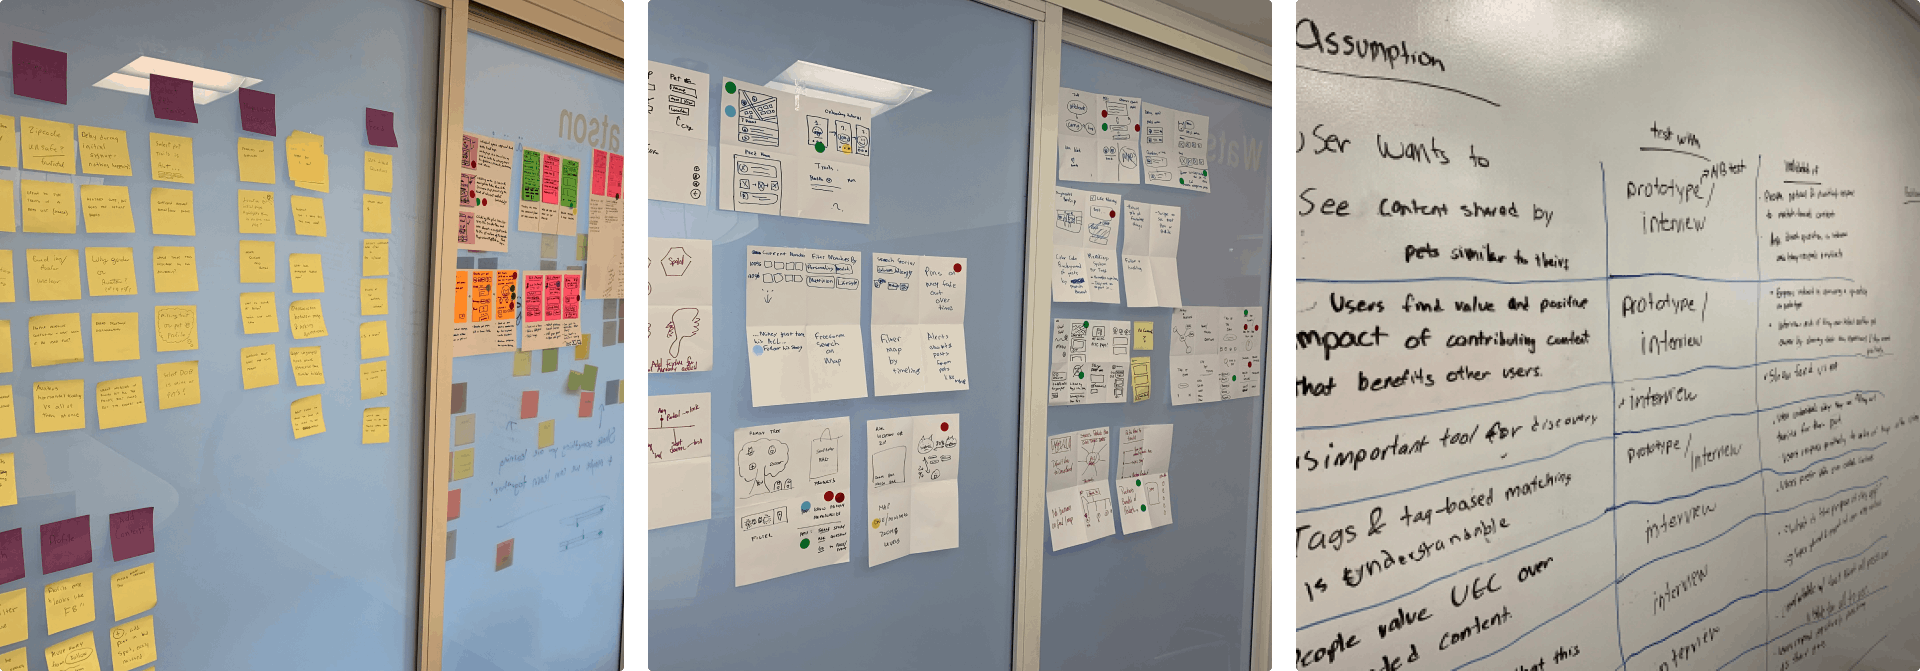 Three photos from the EdgyPet design sprint; post-its on a glass wall arranged in a grid, storyboard sketches pinned up on a wall, a whiteboard with an assumptions test table